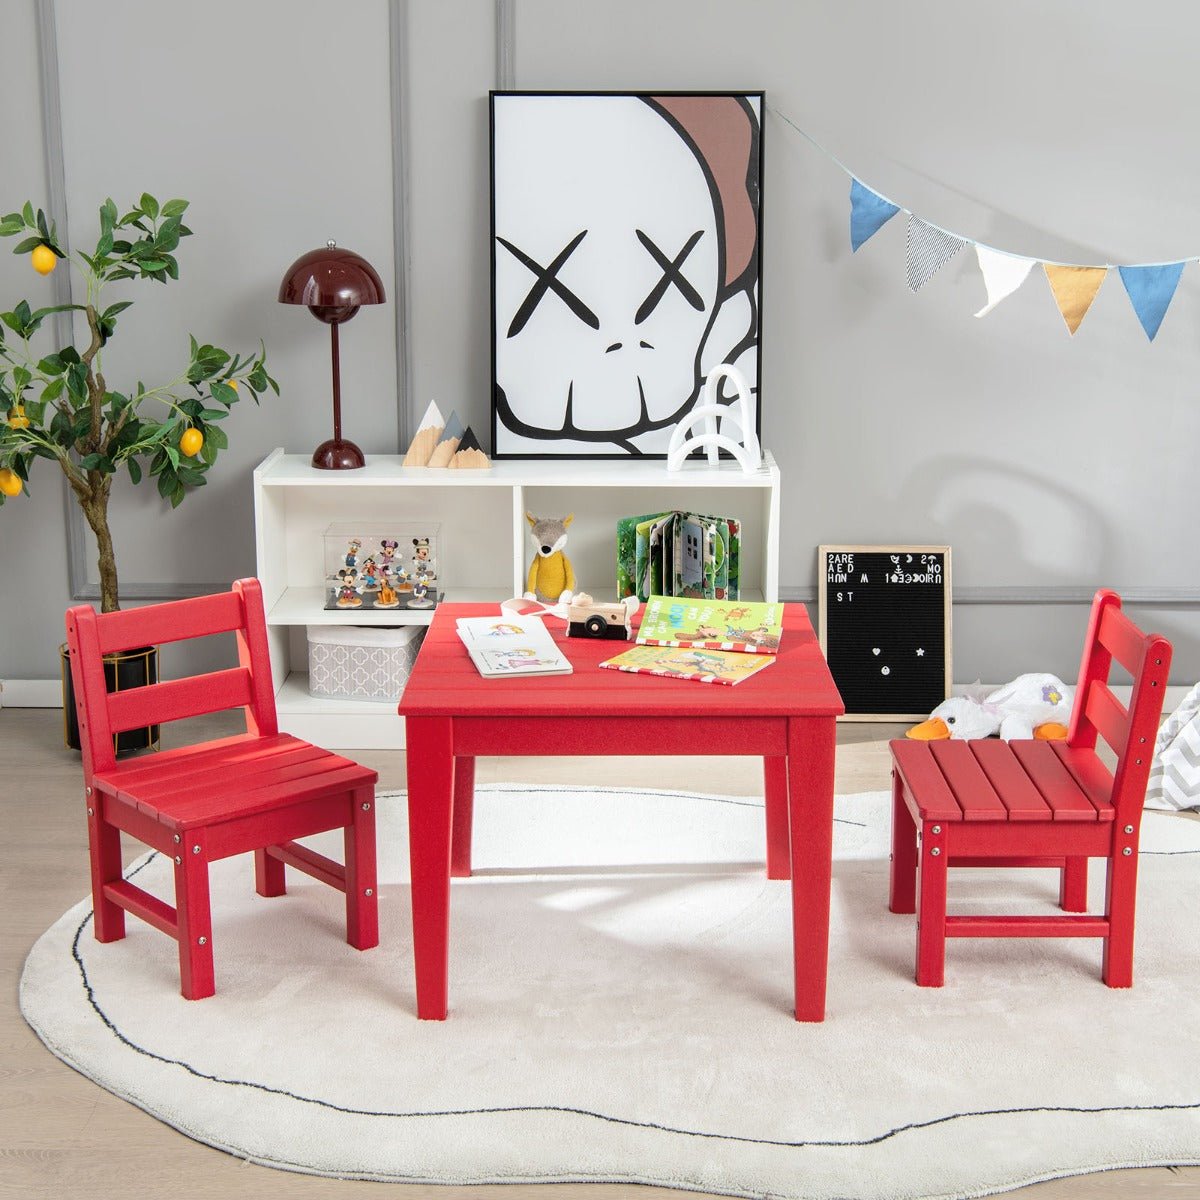 Shop Now for Fun Times: Red Kids Table Set